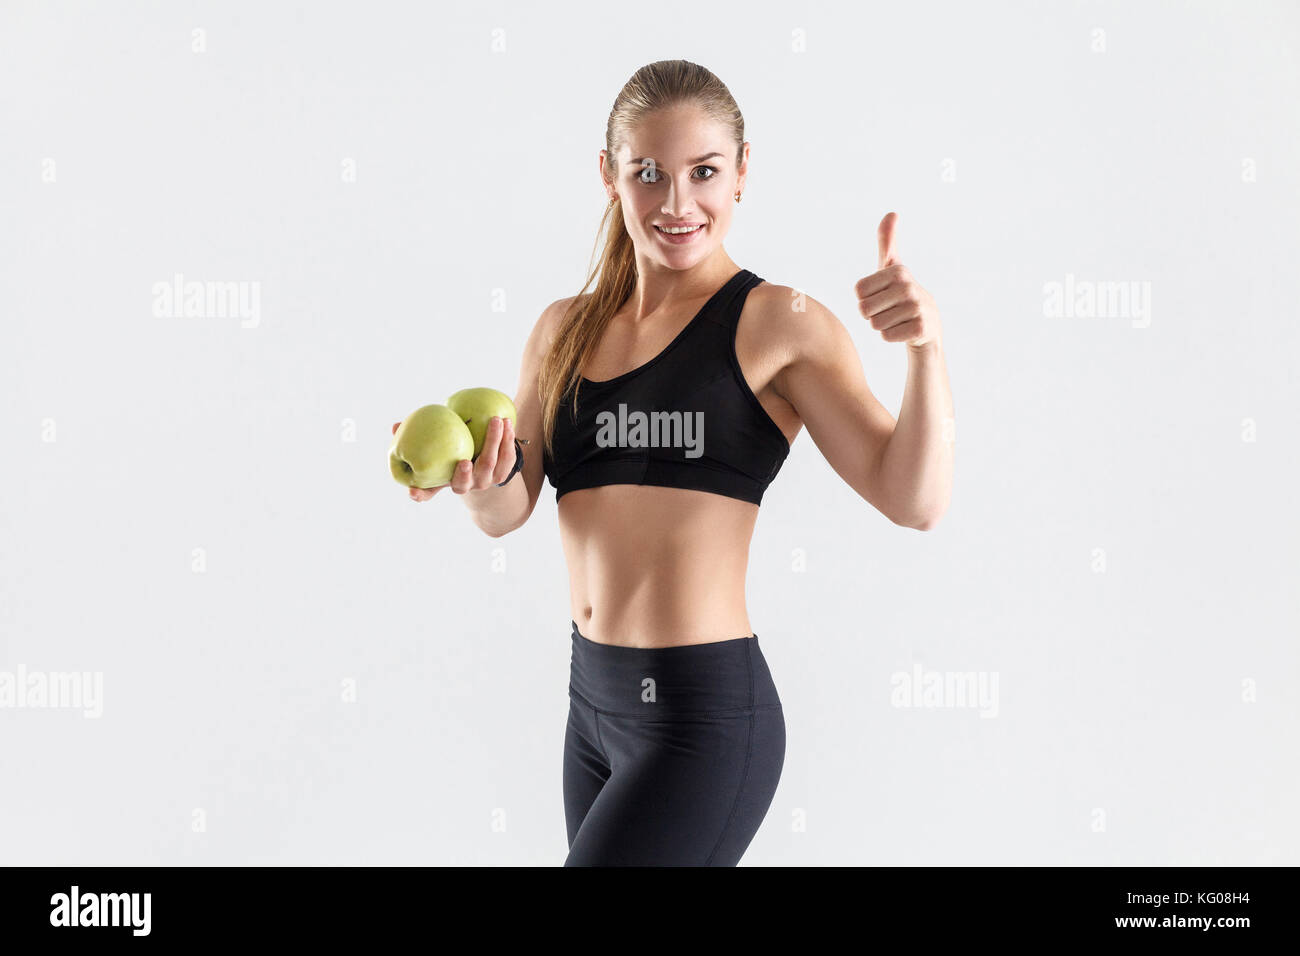 Healthy, diet concept. Happiness woman holding apple and thumbs up. Studio shot Stock Photo